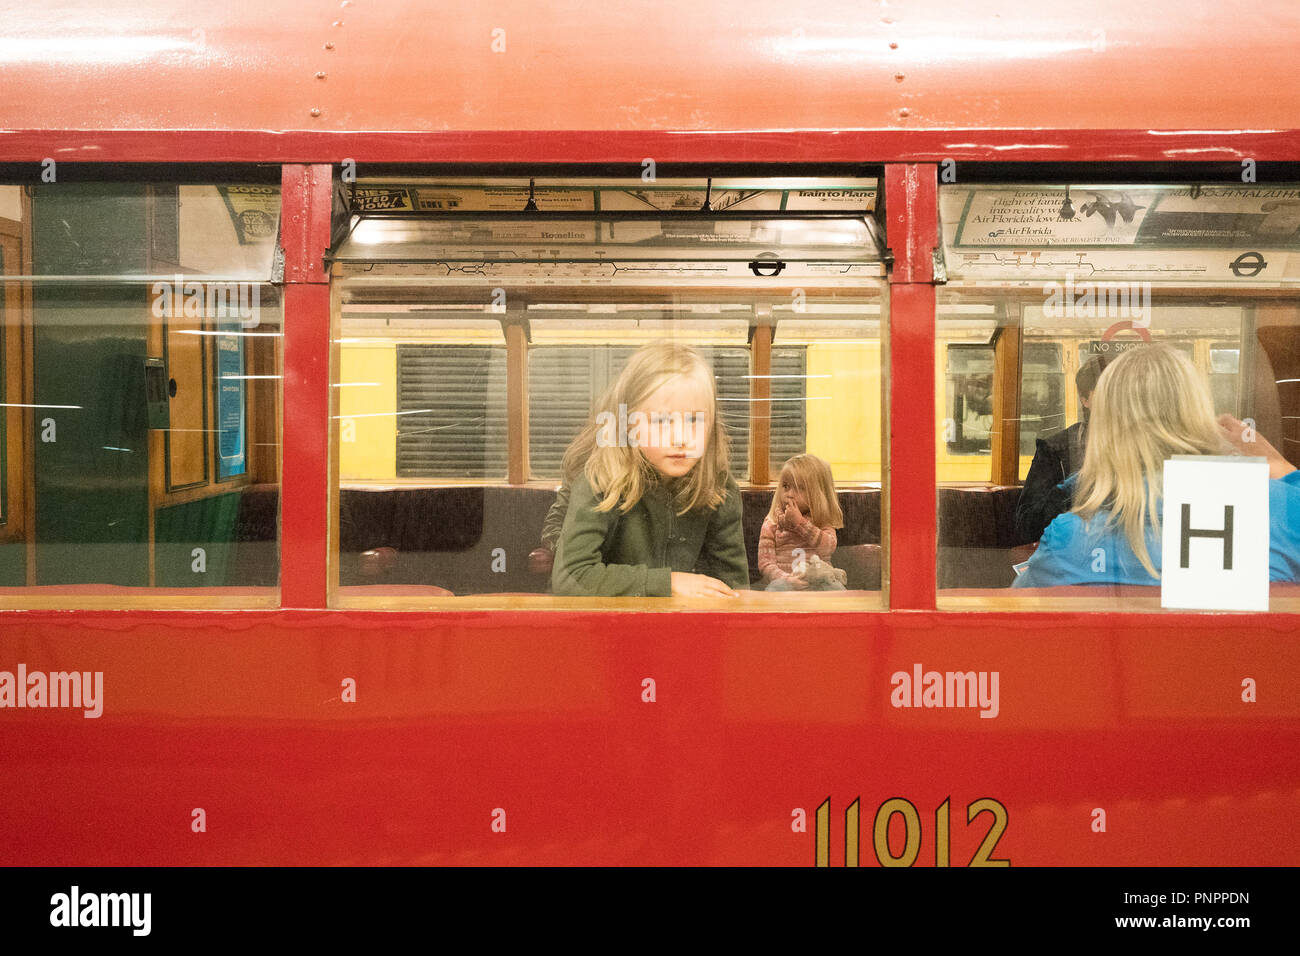 Scenes from the London Transport Museum Depot, which opens its doors to the public twice a year. Photo date: Saturday, September 22, 2018. Photo: Roger Garfield/Alamy Live News Stock Photo